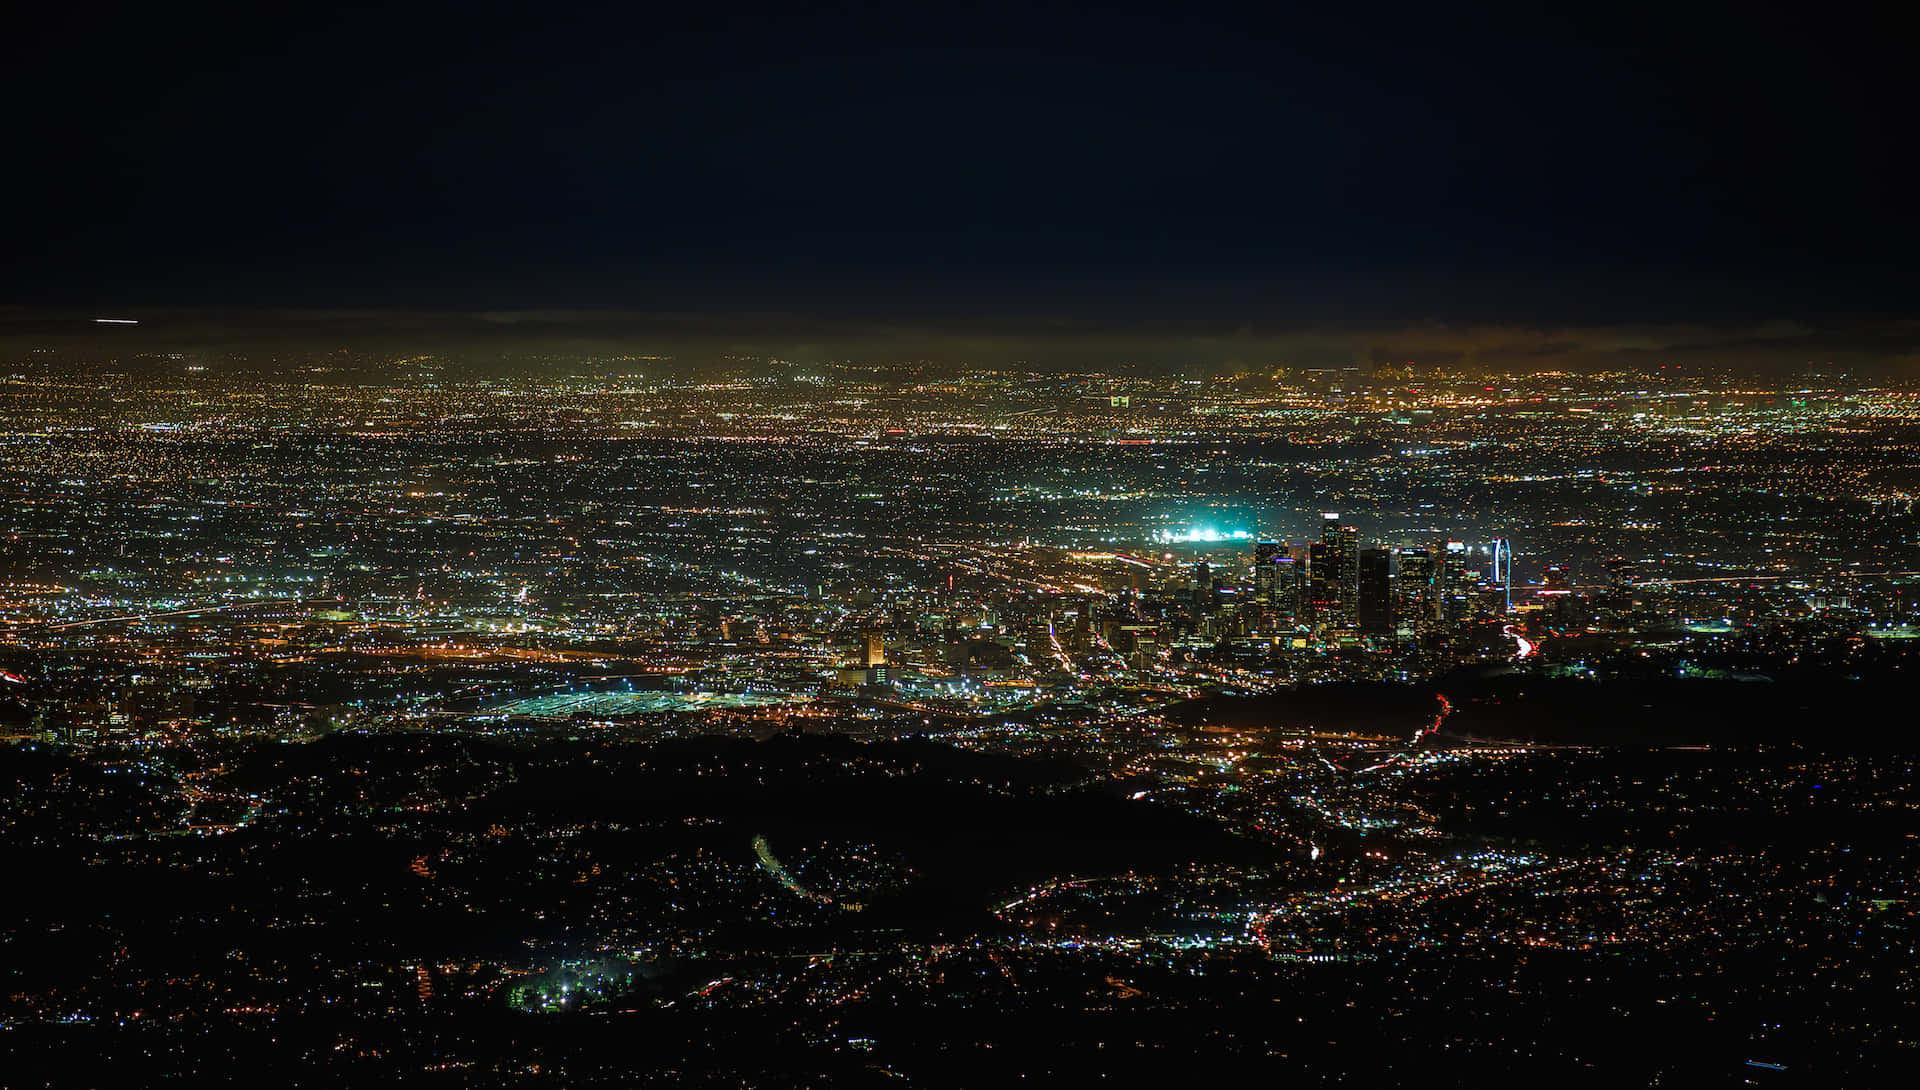 Explore the City of Angels